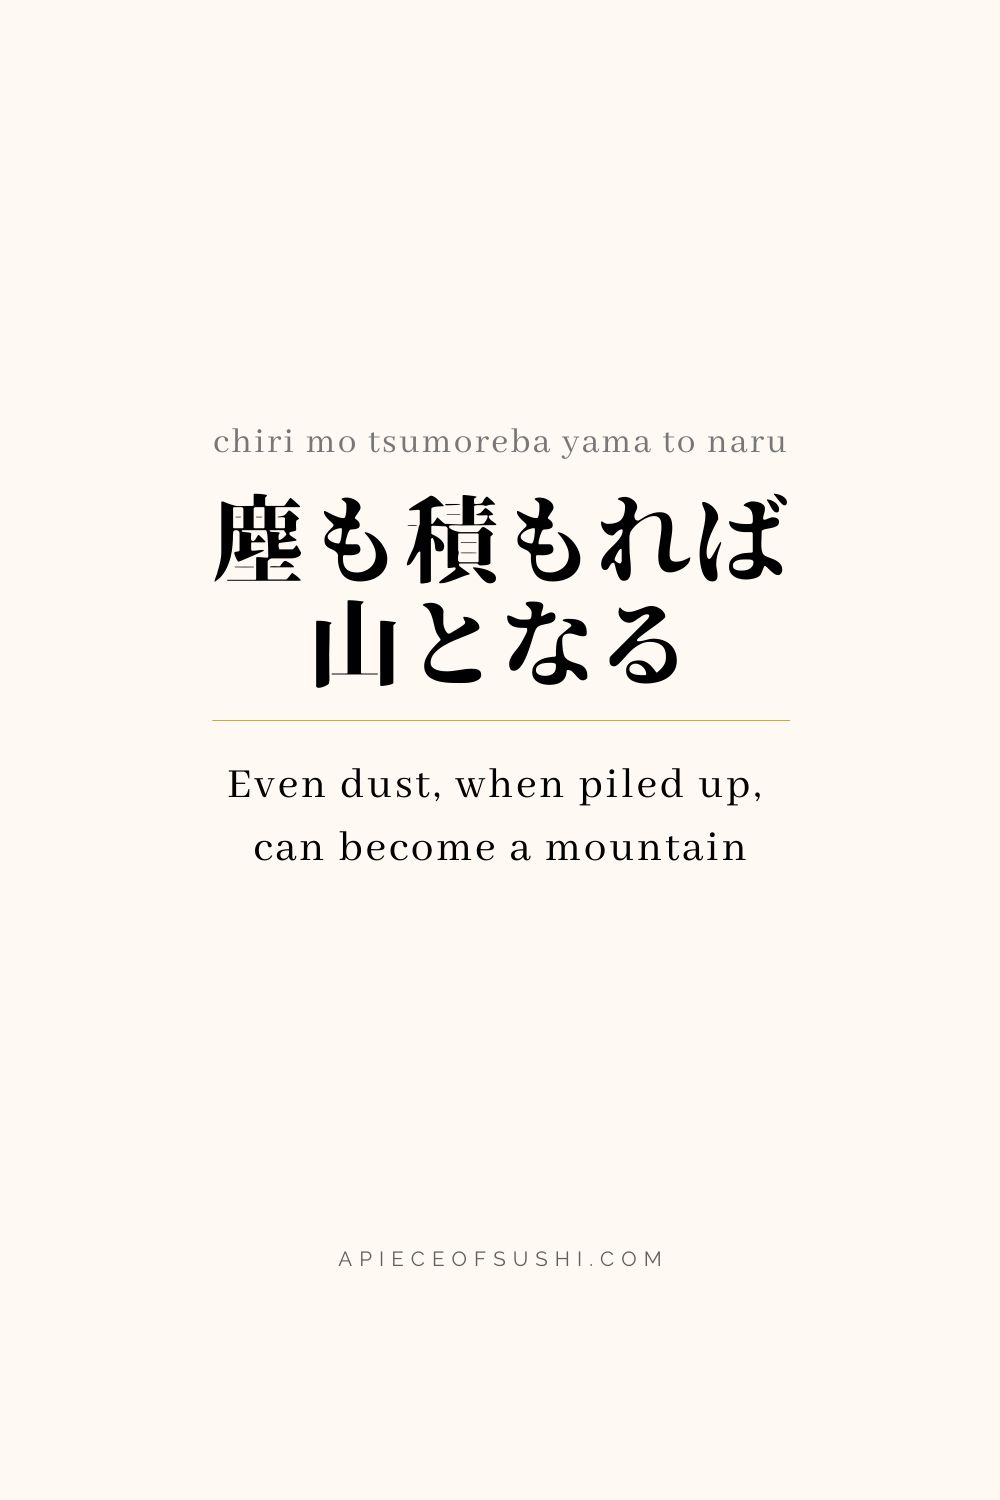 Japanese Proverb 2 Chiri Mo Tsumoreba Yama To Naru Even Dust When Piled Up Can Become A Mountain 塵も積もれば山となる A Piece Of Sushi